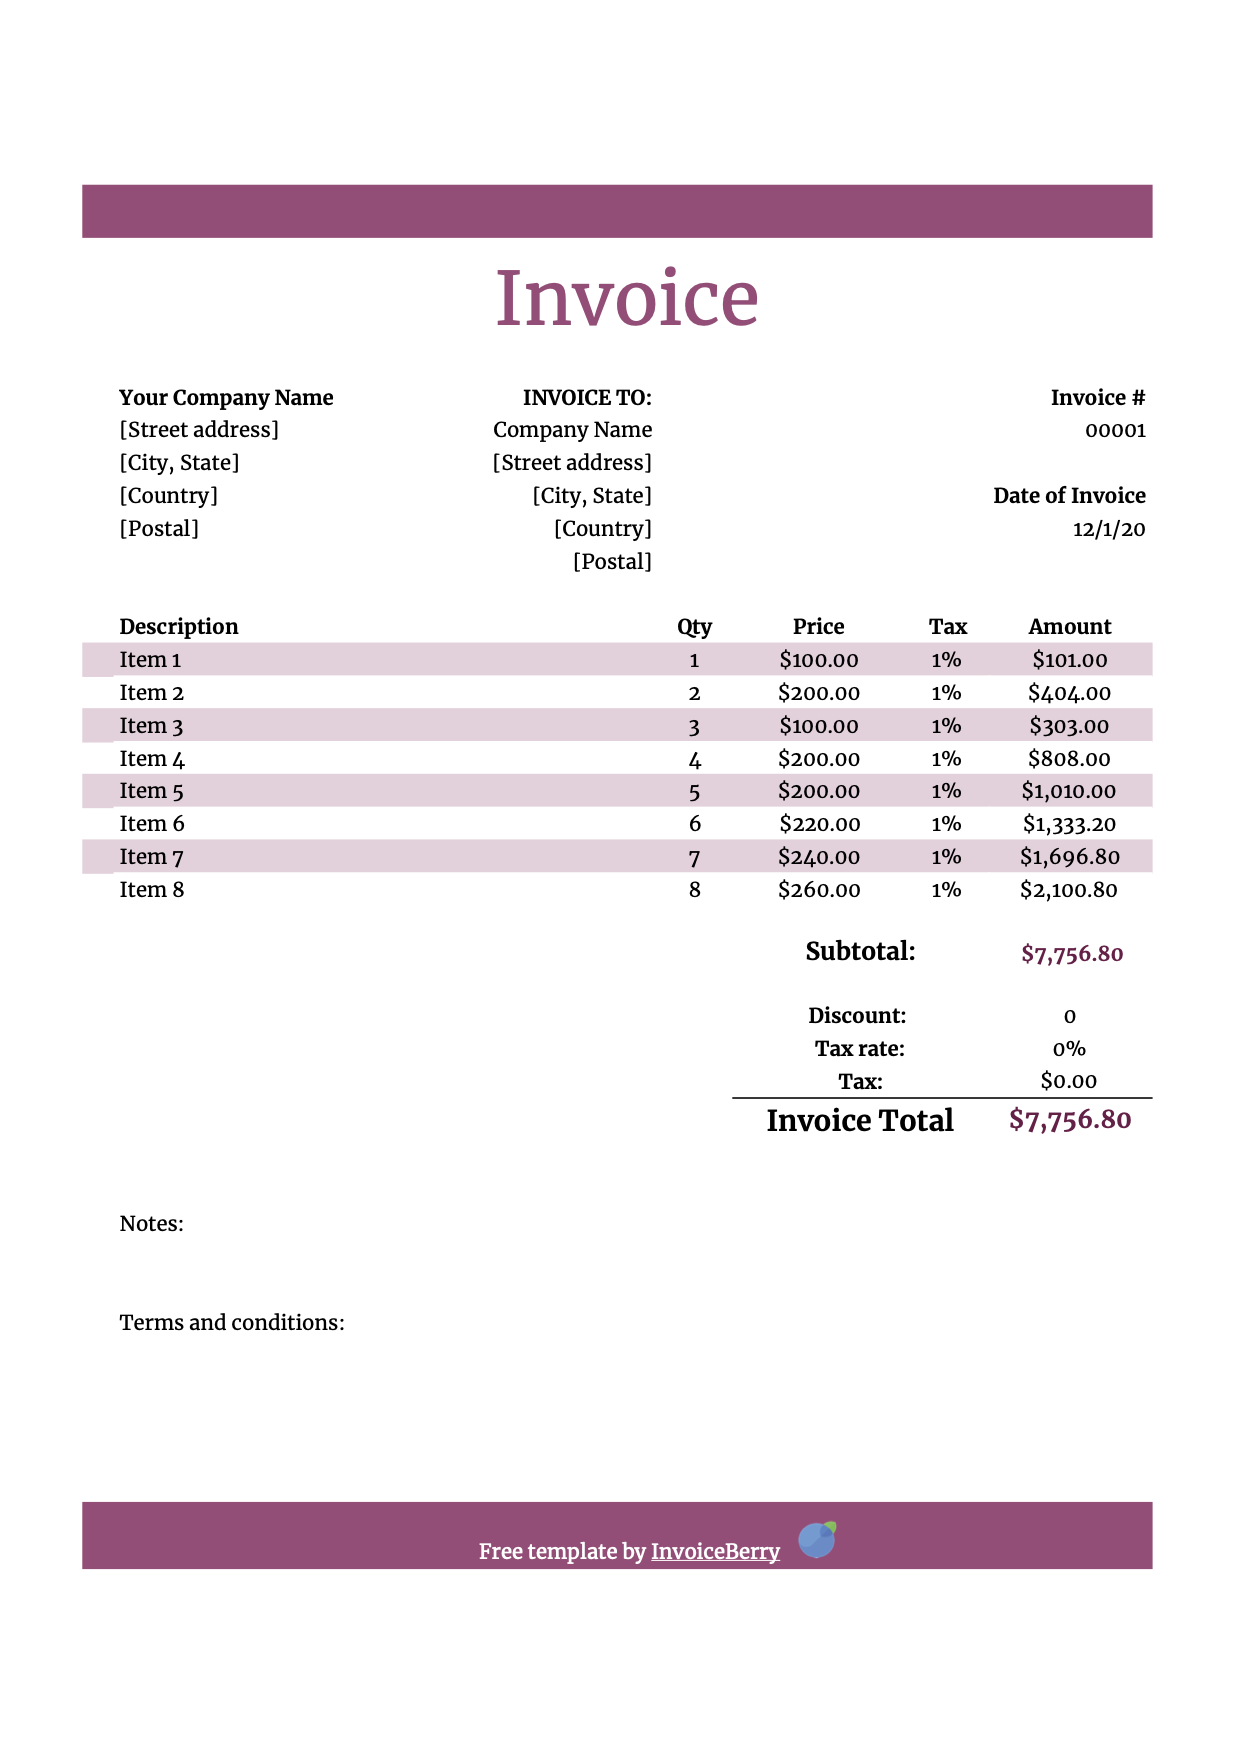 Free Numbers Invoice Templates Get Invoice Templates For Mac Invoiceberry